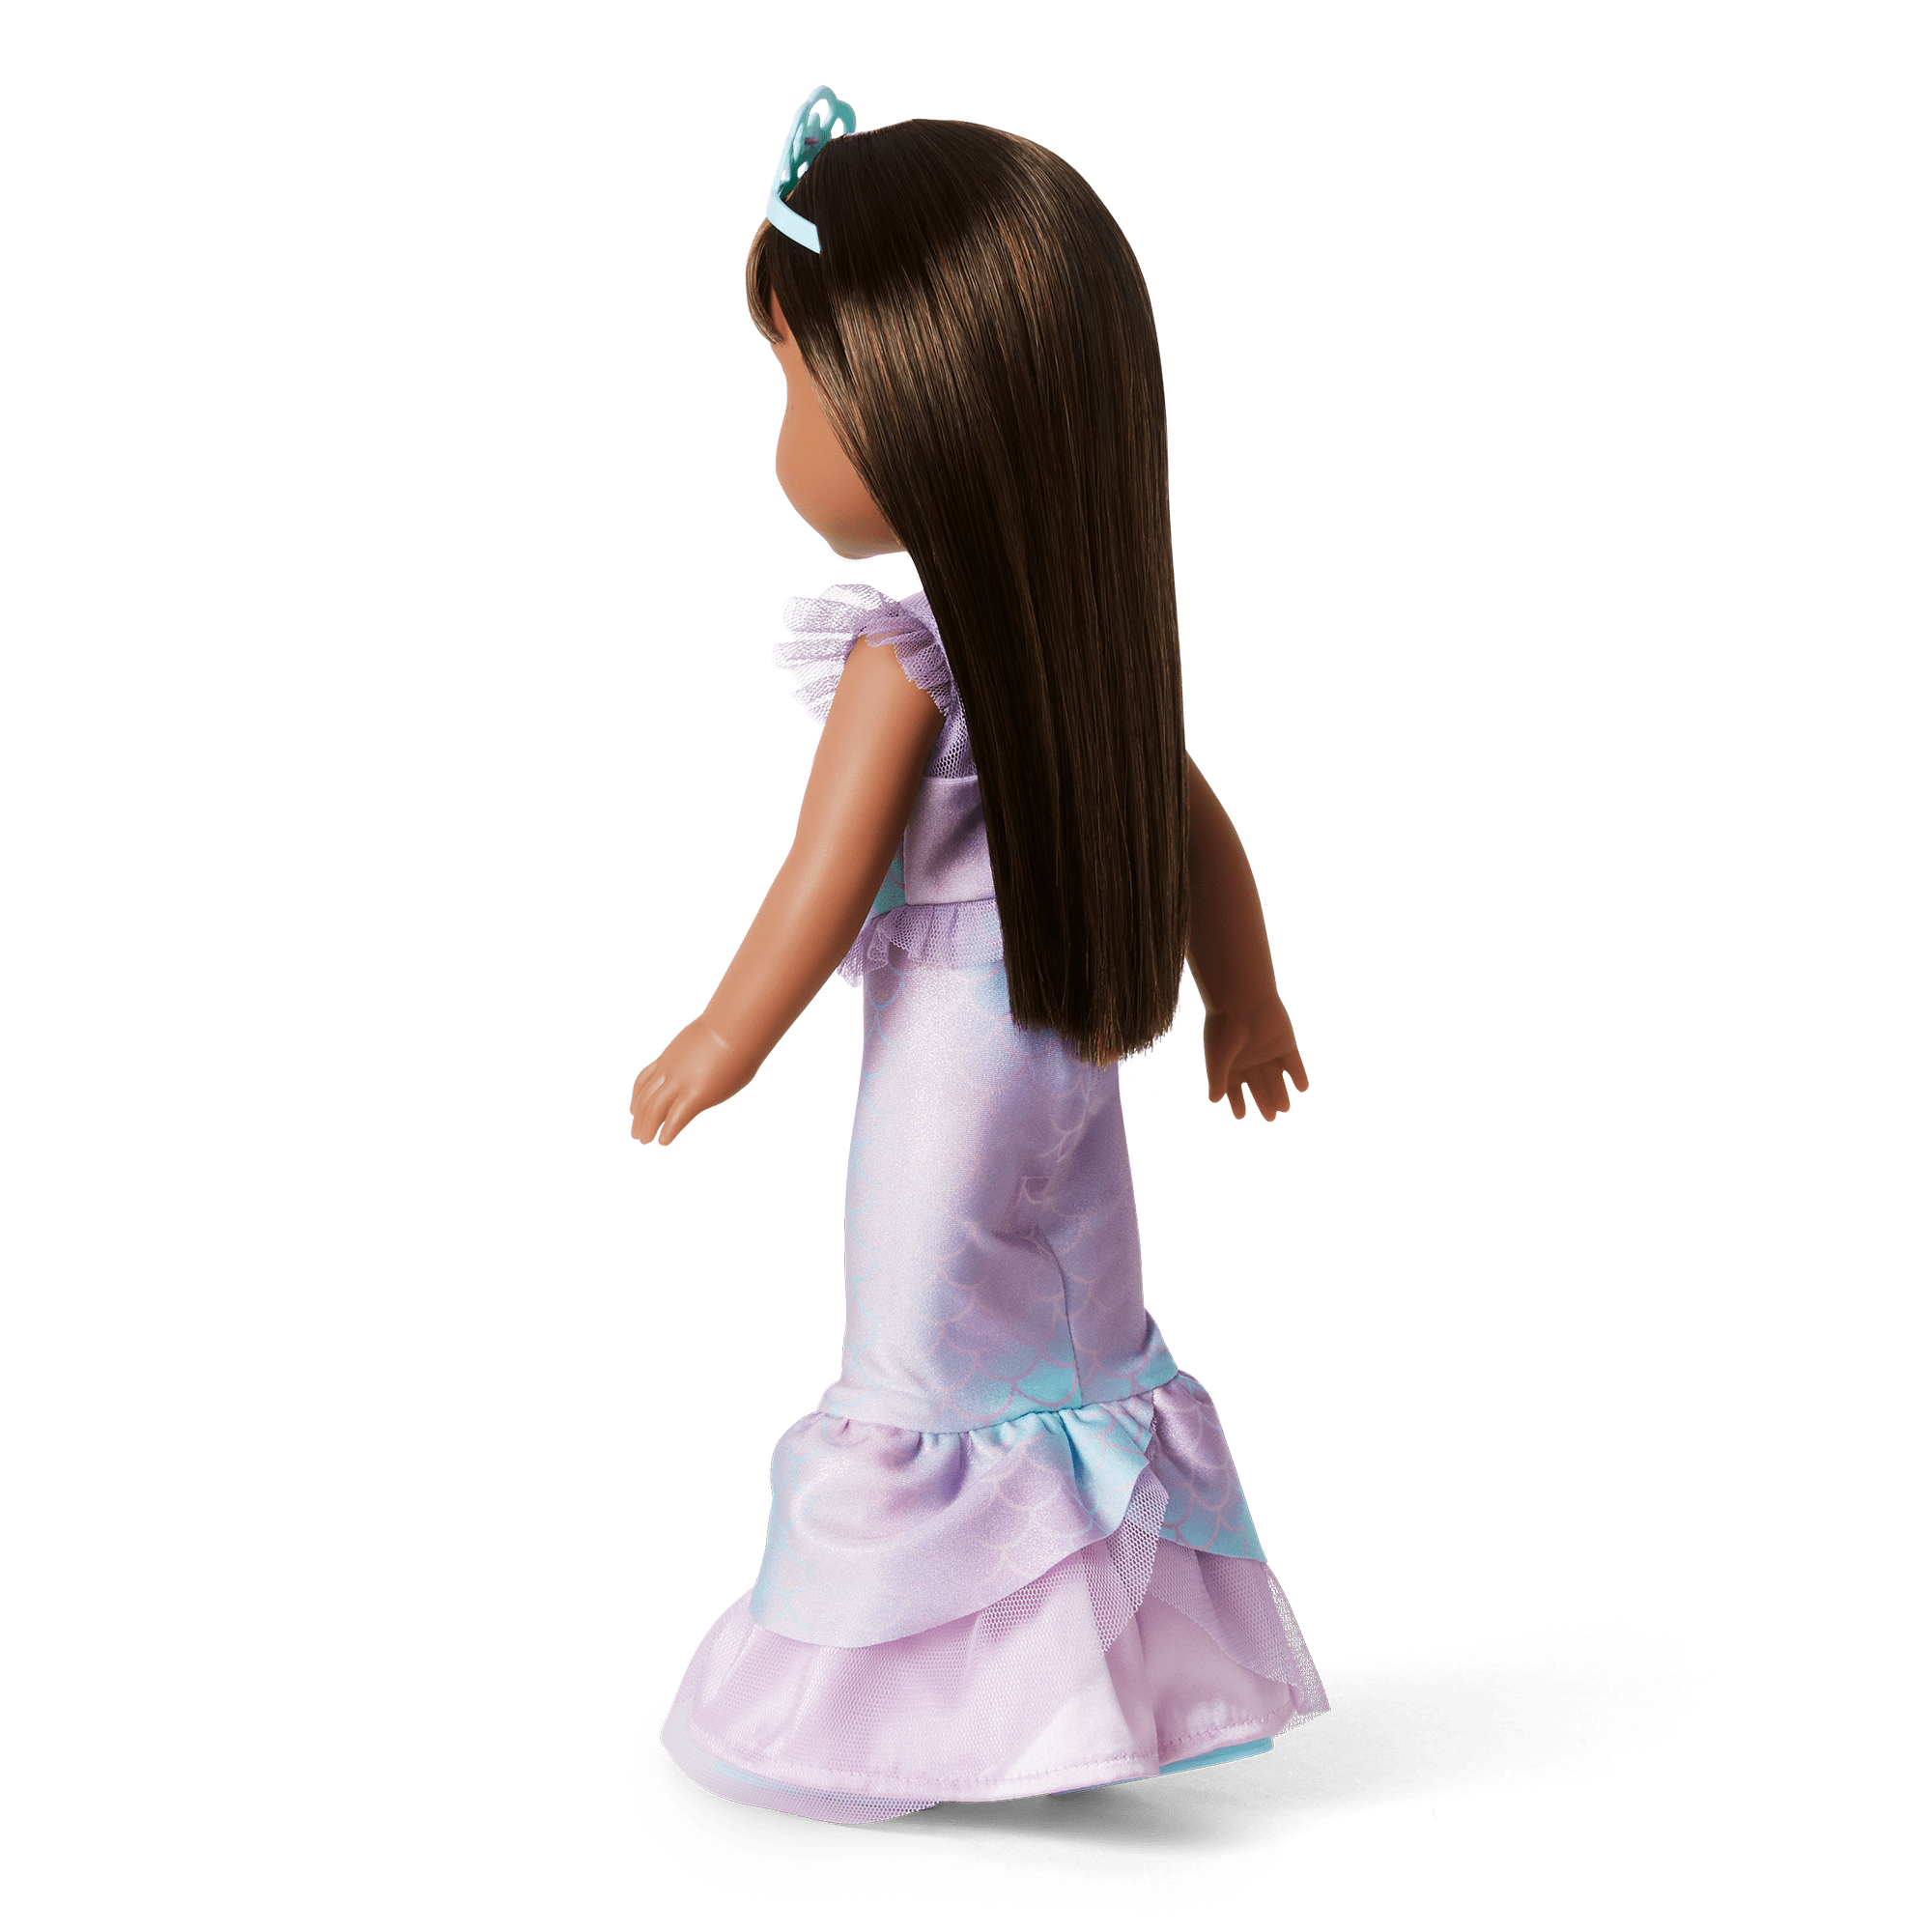 8,646 Best Friends Girls Cartoon Royalty-Free Images, Stock Photos &  Pictures